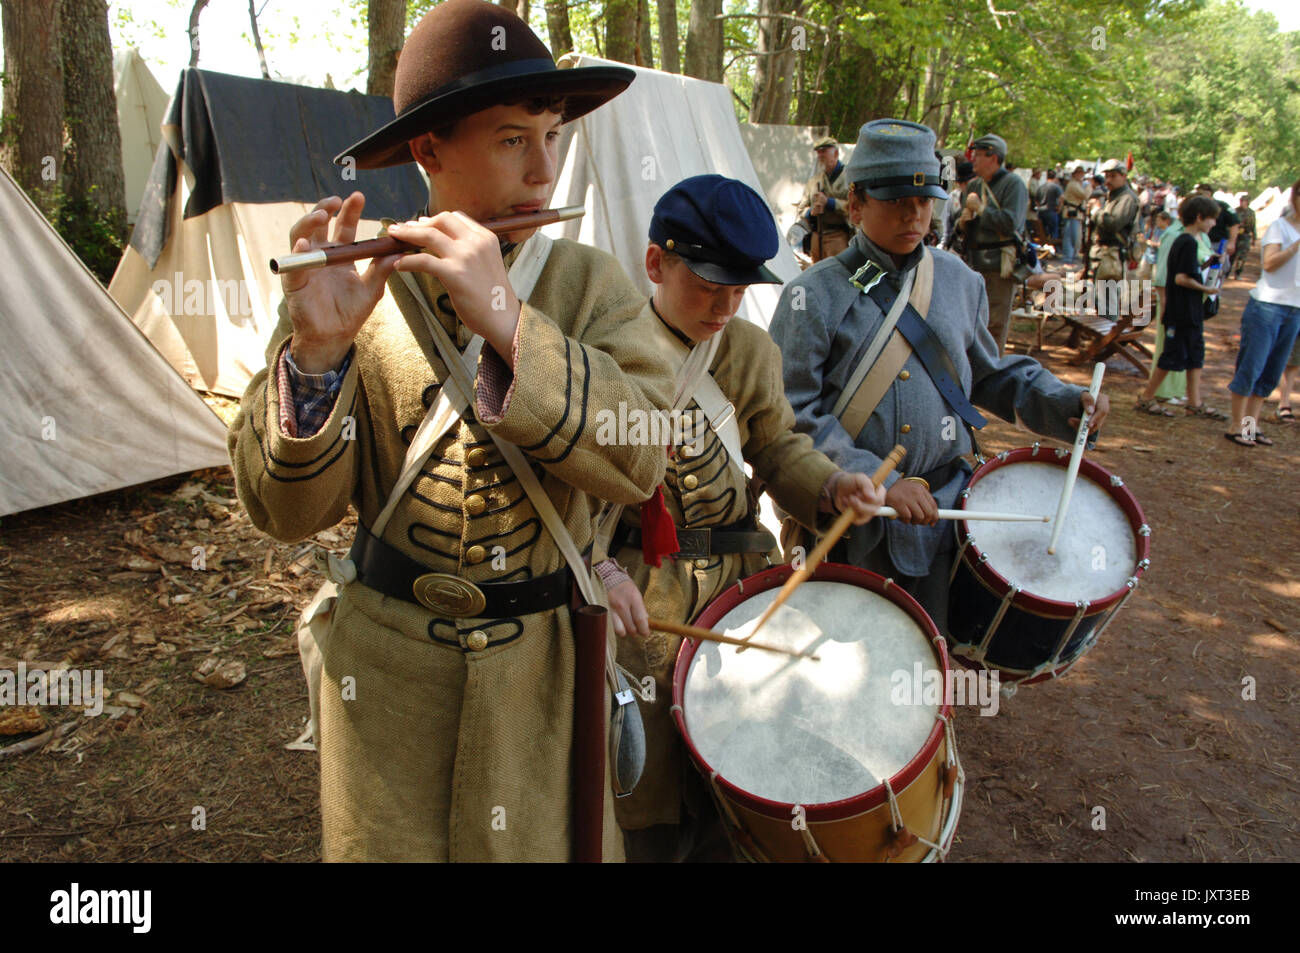 Resaca, GA, USA. 23rd Apr, 2006. Young musicians on fife and drums create authentic atmosphere to the camp sites where hundreds of Civil War reenactors are camped for the weekend battle of Resaca, Ga Credit: Robin Rayne Nelson/ZUMA Wire/Alamy Live News Stock Photo